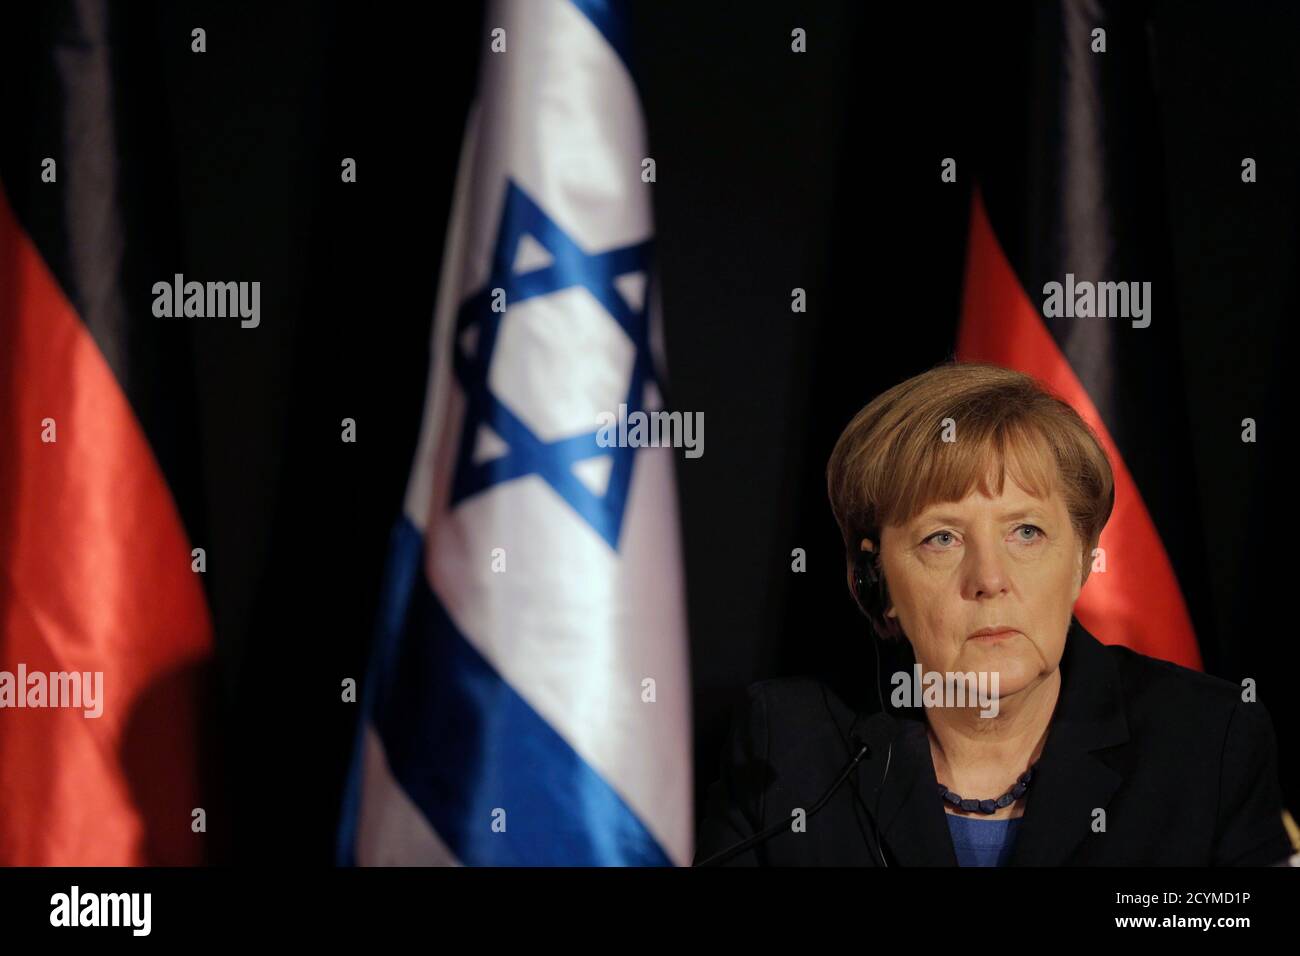 German Chancellor Angela Merkel attends a joint news conference with Israel's Prime Minister Benjamin Netanyahu (not pictured) in Jerusalem February 25, 2014. Germany views Iran as a potential threat not just to Israel, but also to European countries, Merkel said on Tuesday at a joint news conference with Netanyahu. REUTERS/Ammar Awad (JERUSALEM - Tags: POLITICS PROFILE) Stock Photo